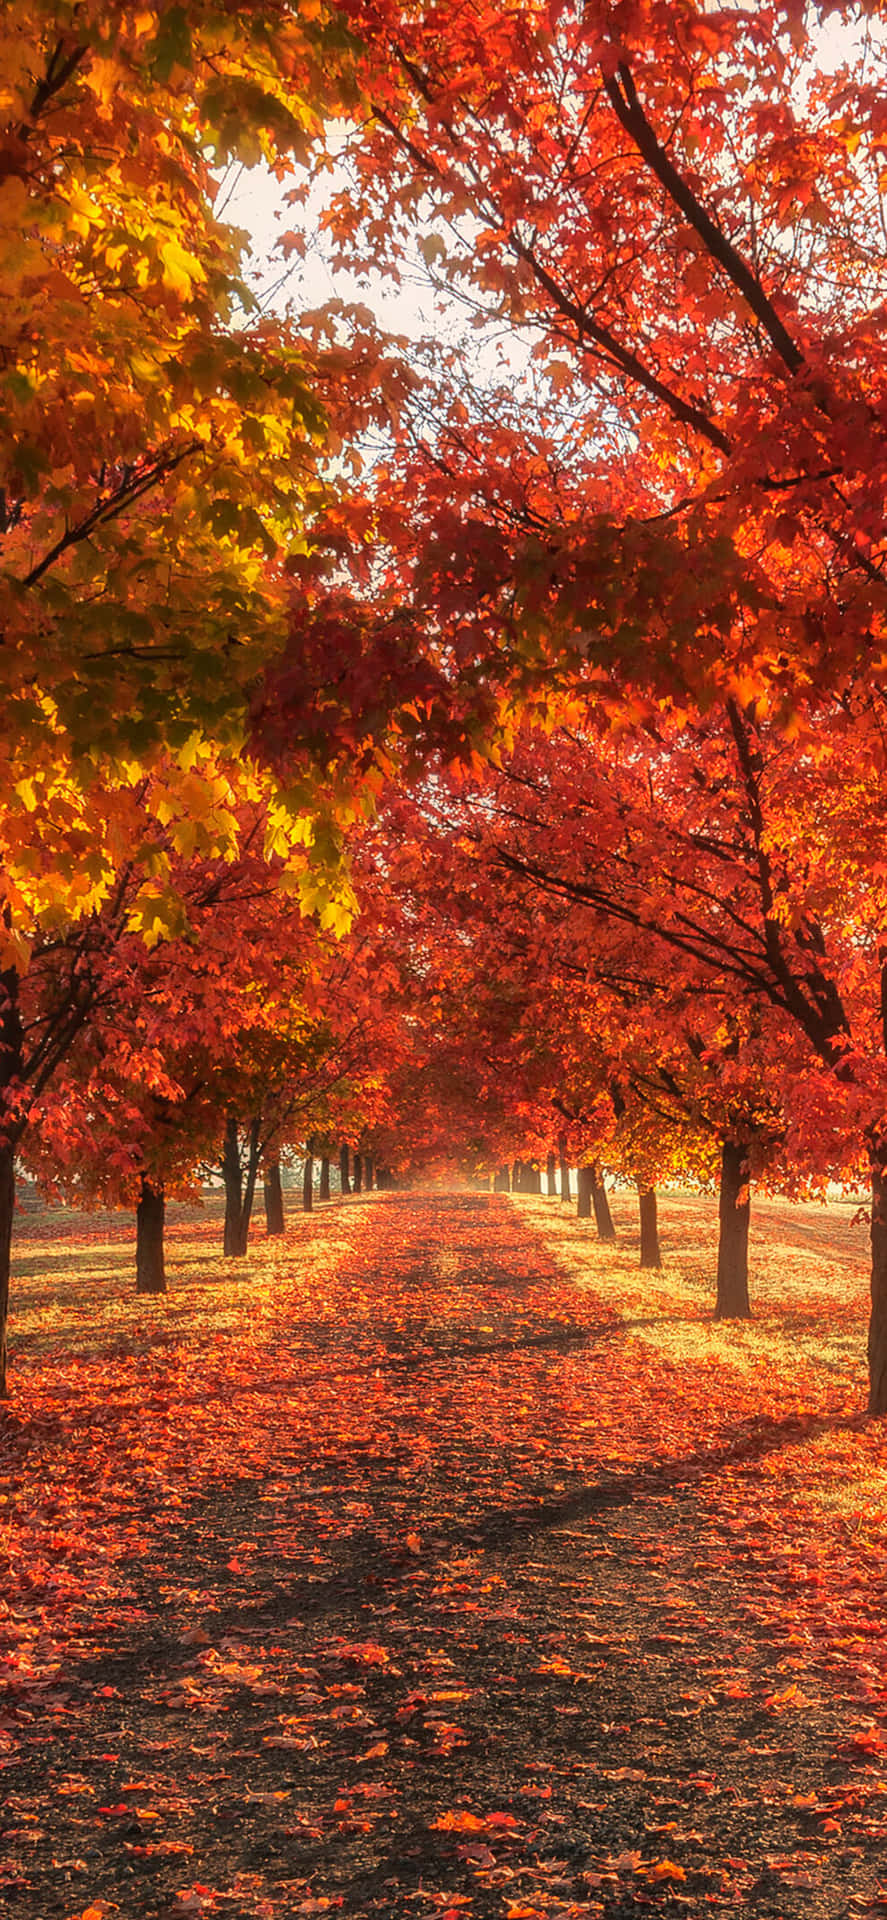 Enjoy the vibrant colors of nature with this stunning Iphone Fall wallpaper.